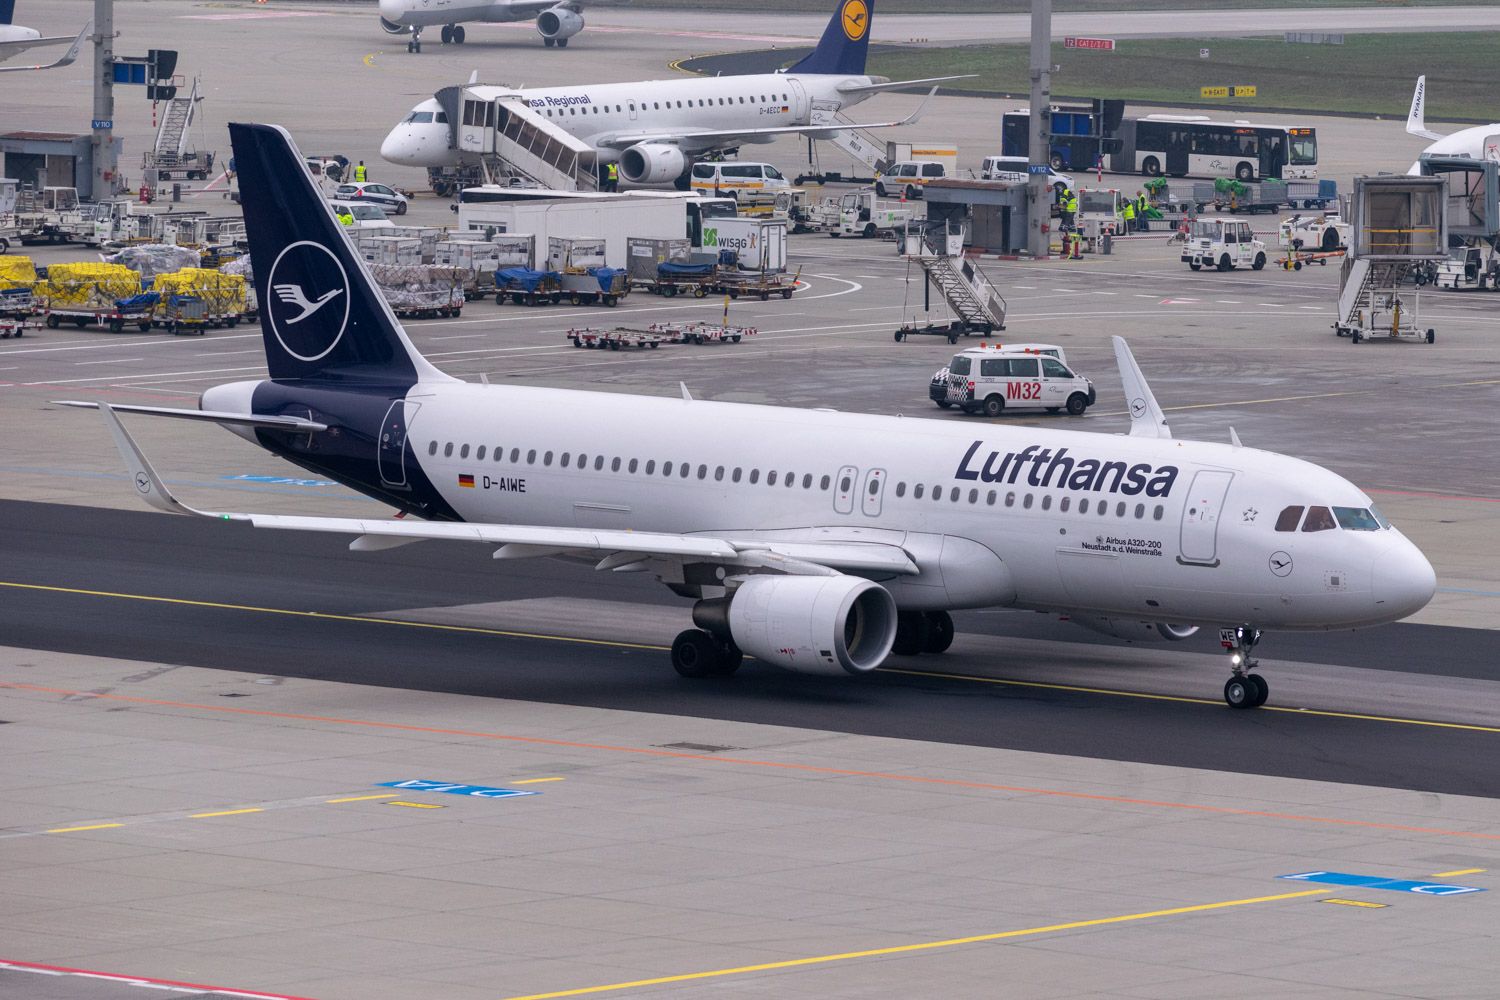 A Lufthansa A320 on the taxiway.